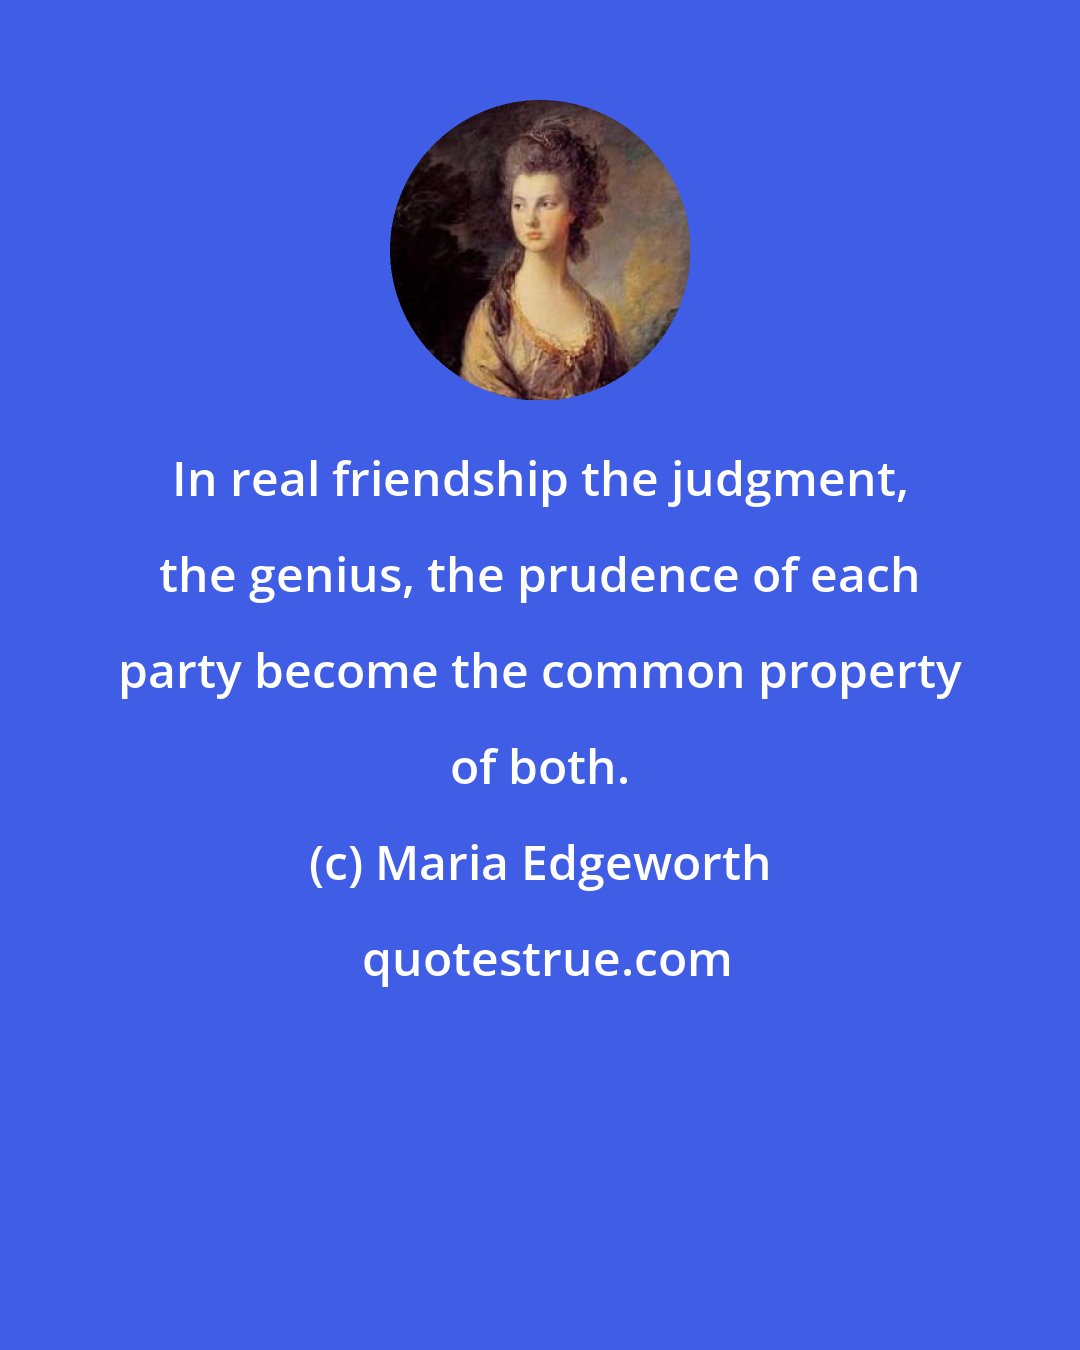 Maria Edgeworth: In real friendship the judgment, the genius, the prudence of each party become the common property of both.